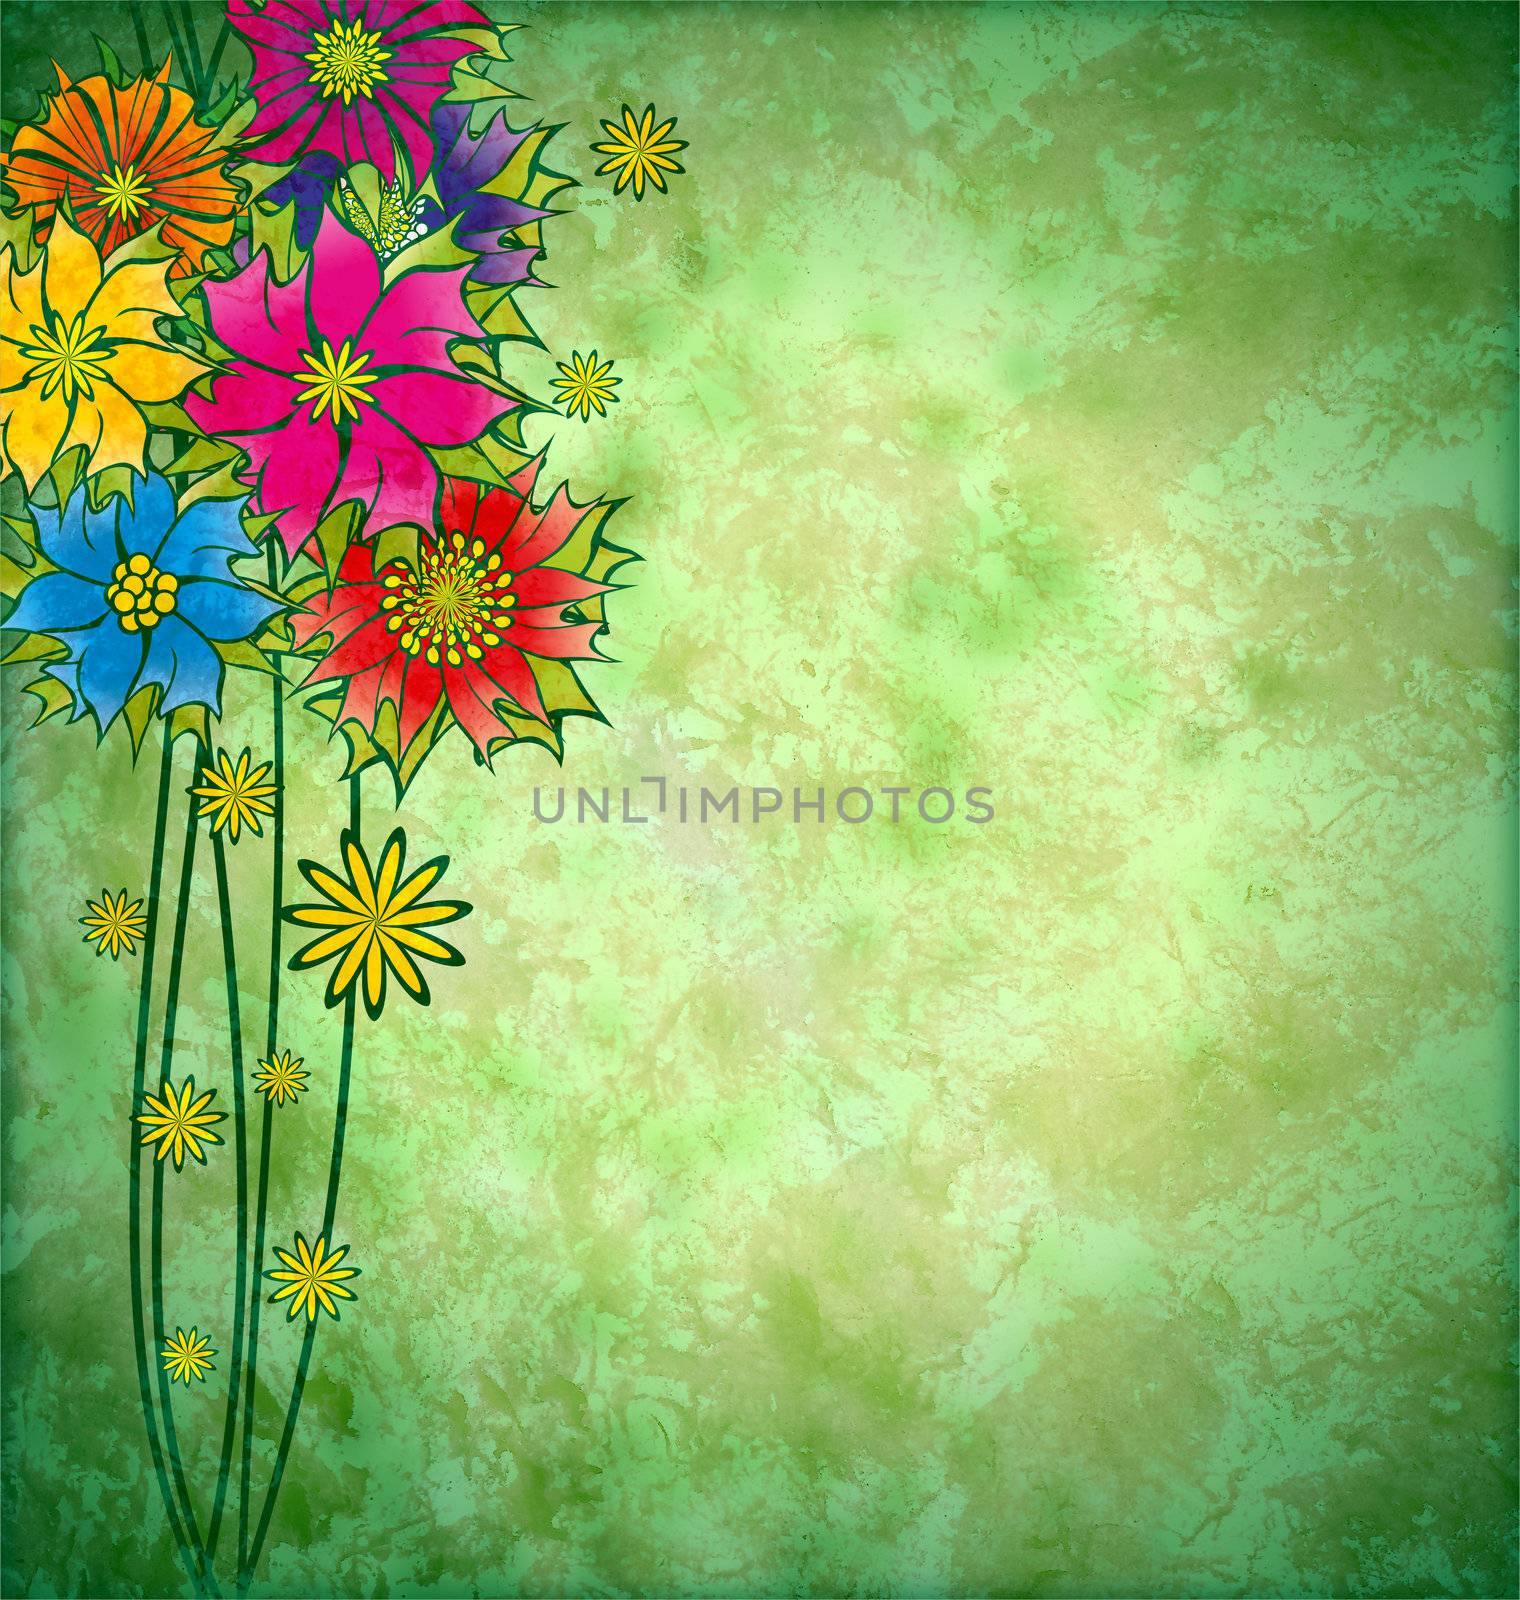 colorful graphic flowers on grunge watercolor background by CherJu